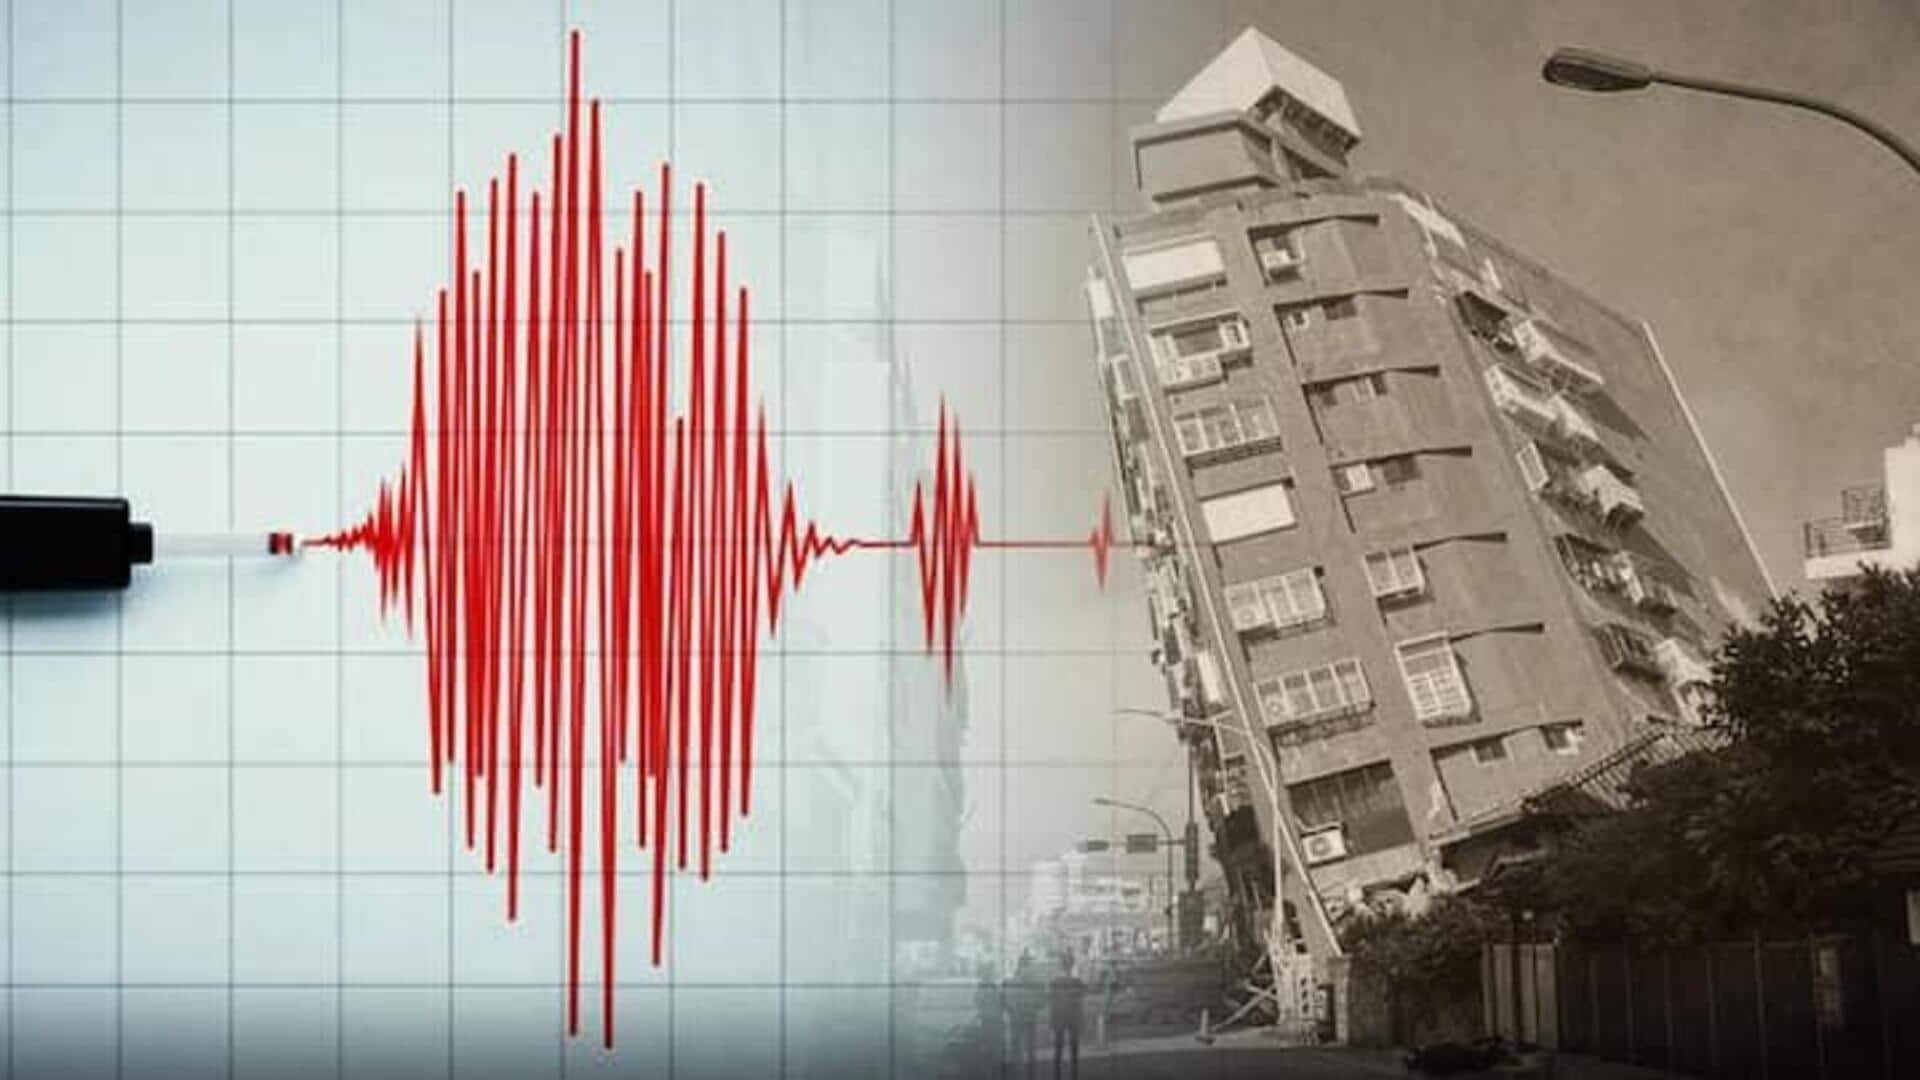 Explained: How prepared is Taiwan to deal with earthquakes